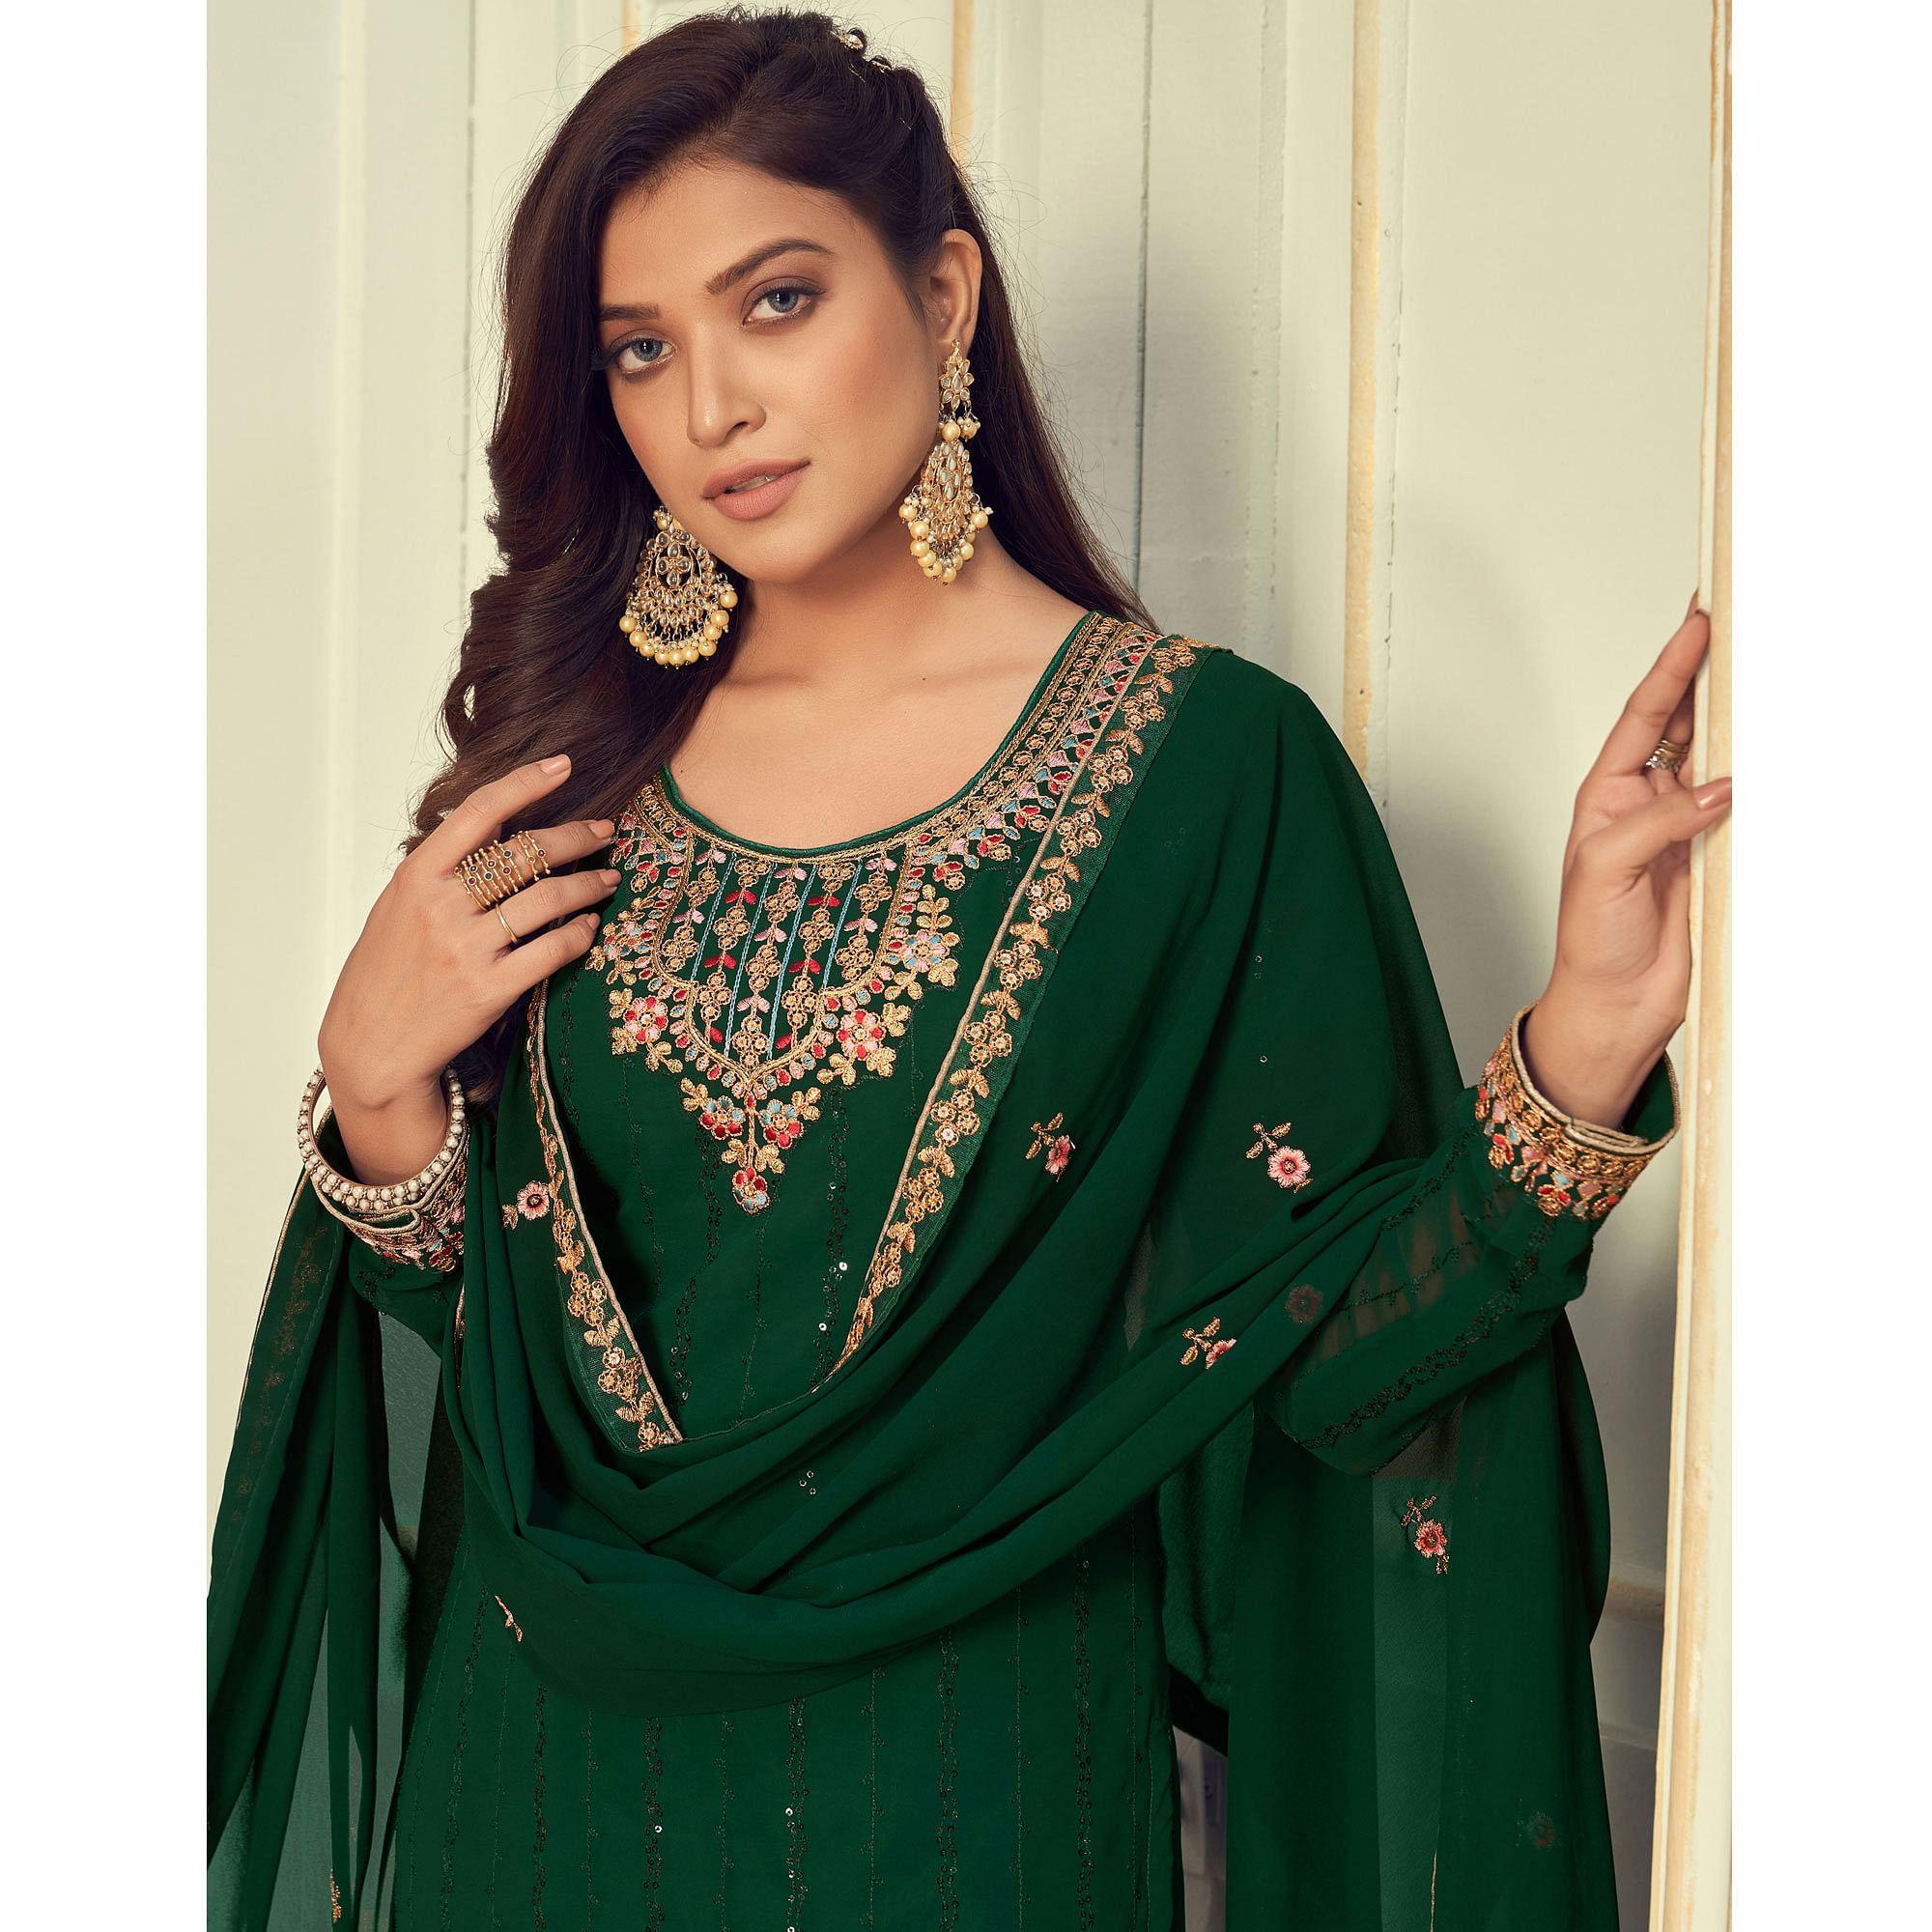 Green Partywear Embroidery With Embellished Georgette Suit - Peachmode